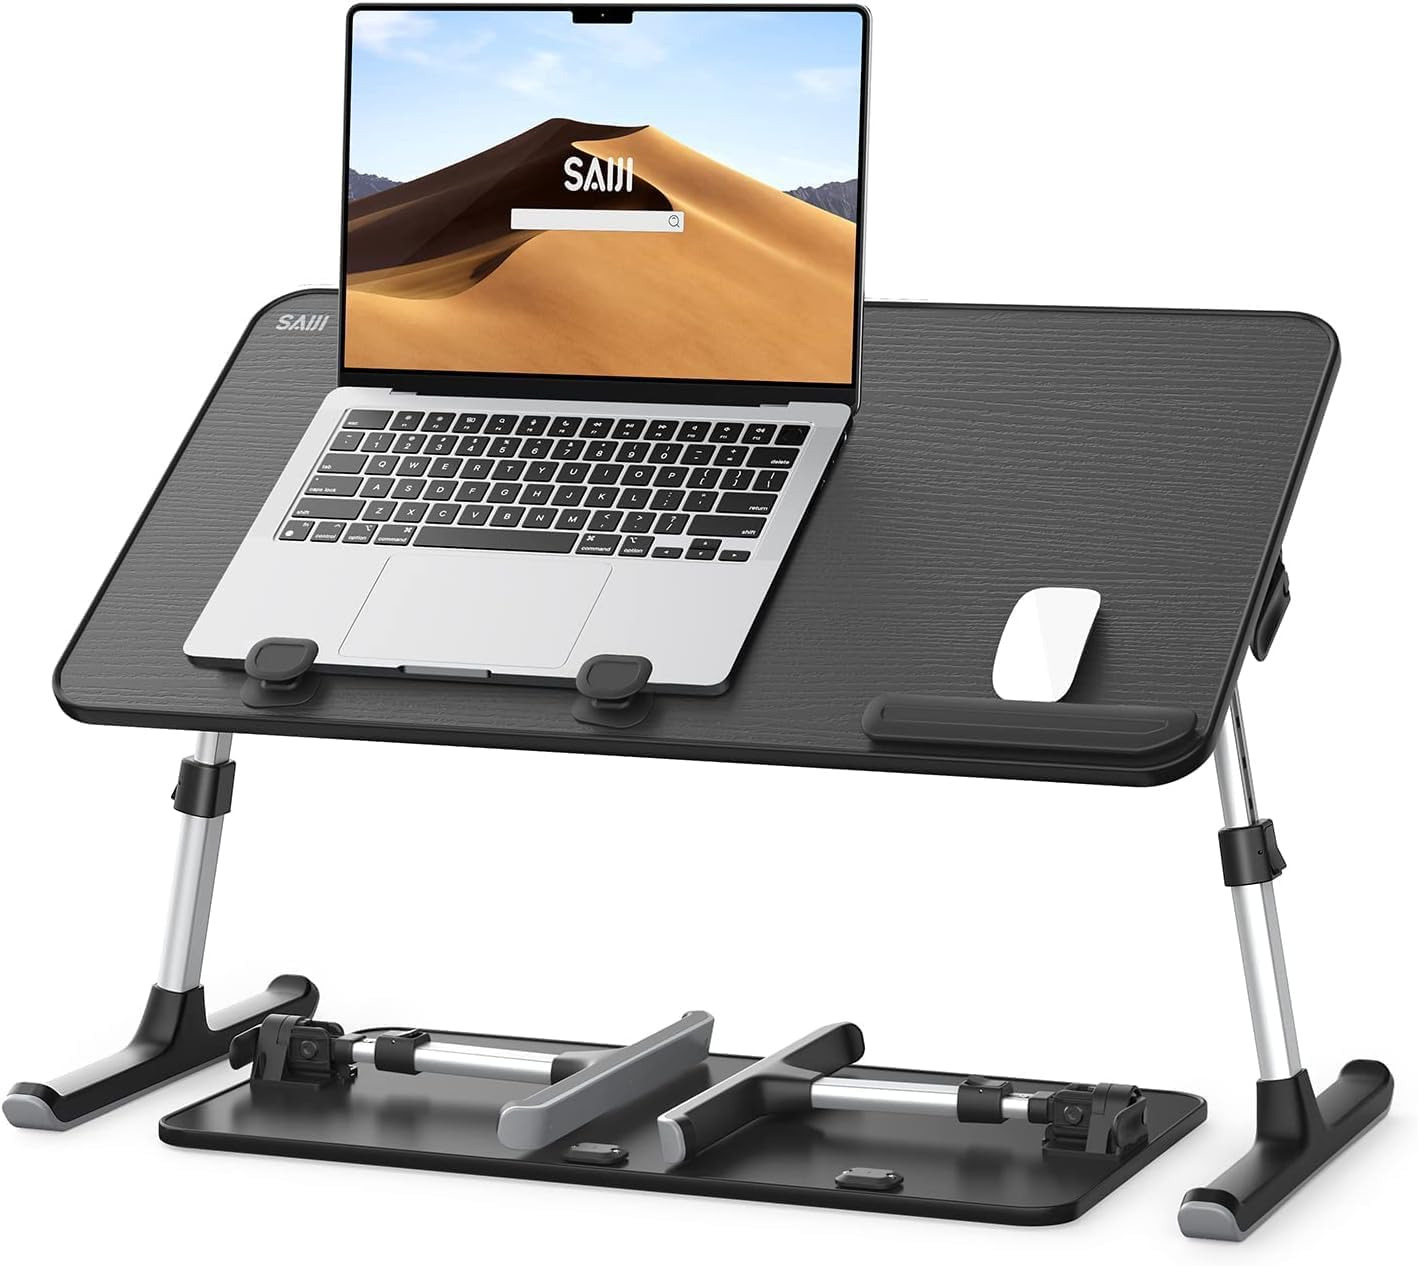 Laptop Desk for Bed, SAIJI Height & Angle Adjustable Laptop Stand for Bed